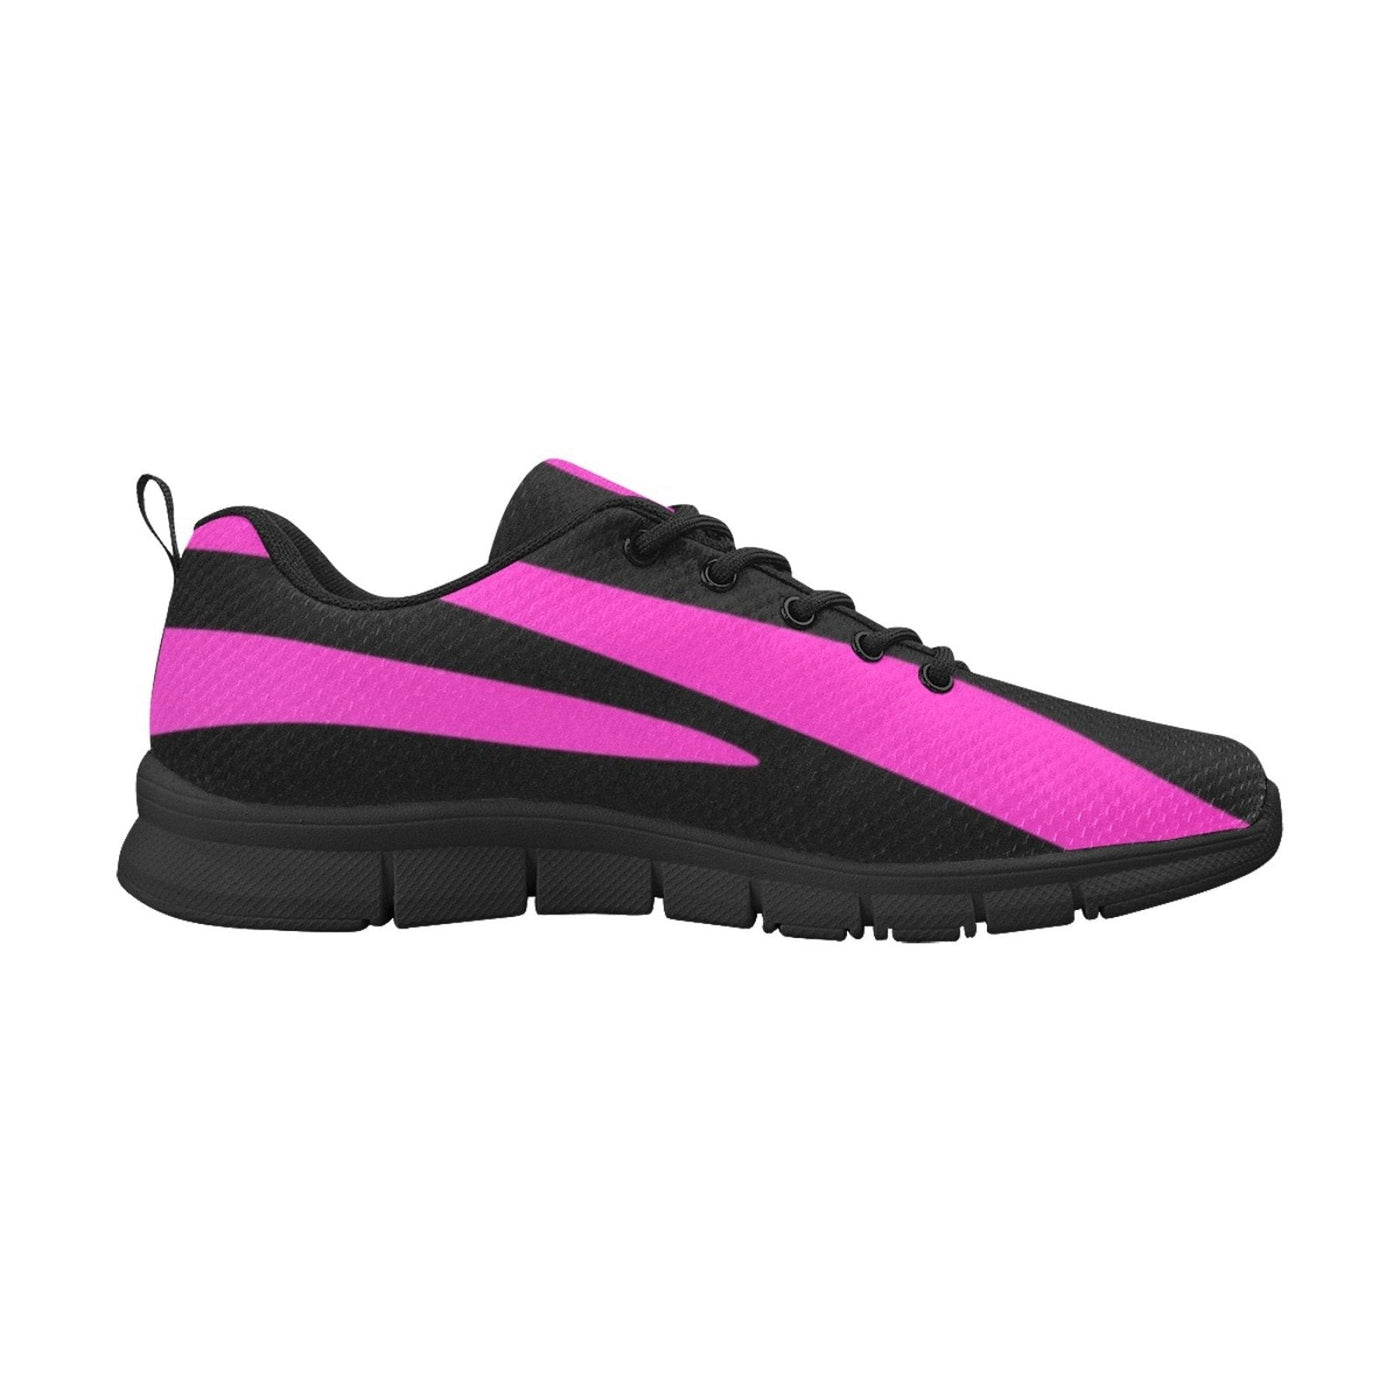 Sneakers For Women Black And Purple Stripe - Running Shoes - Womens | Sneakers |